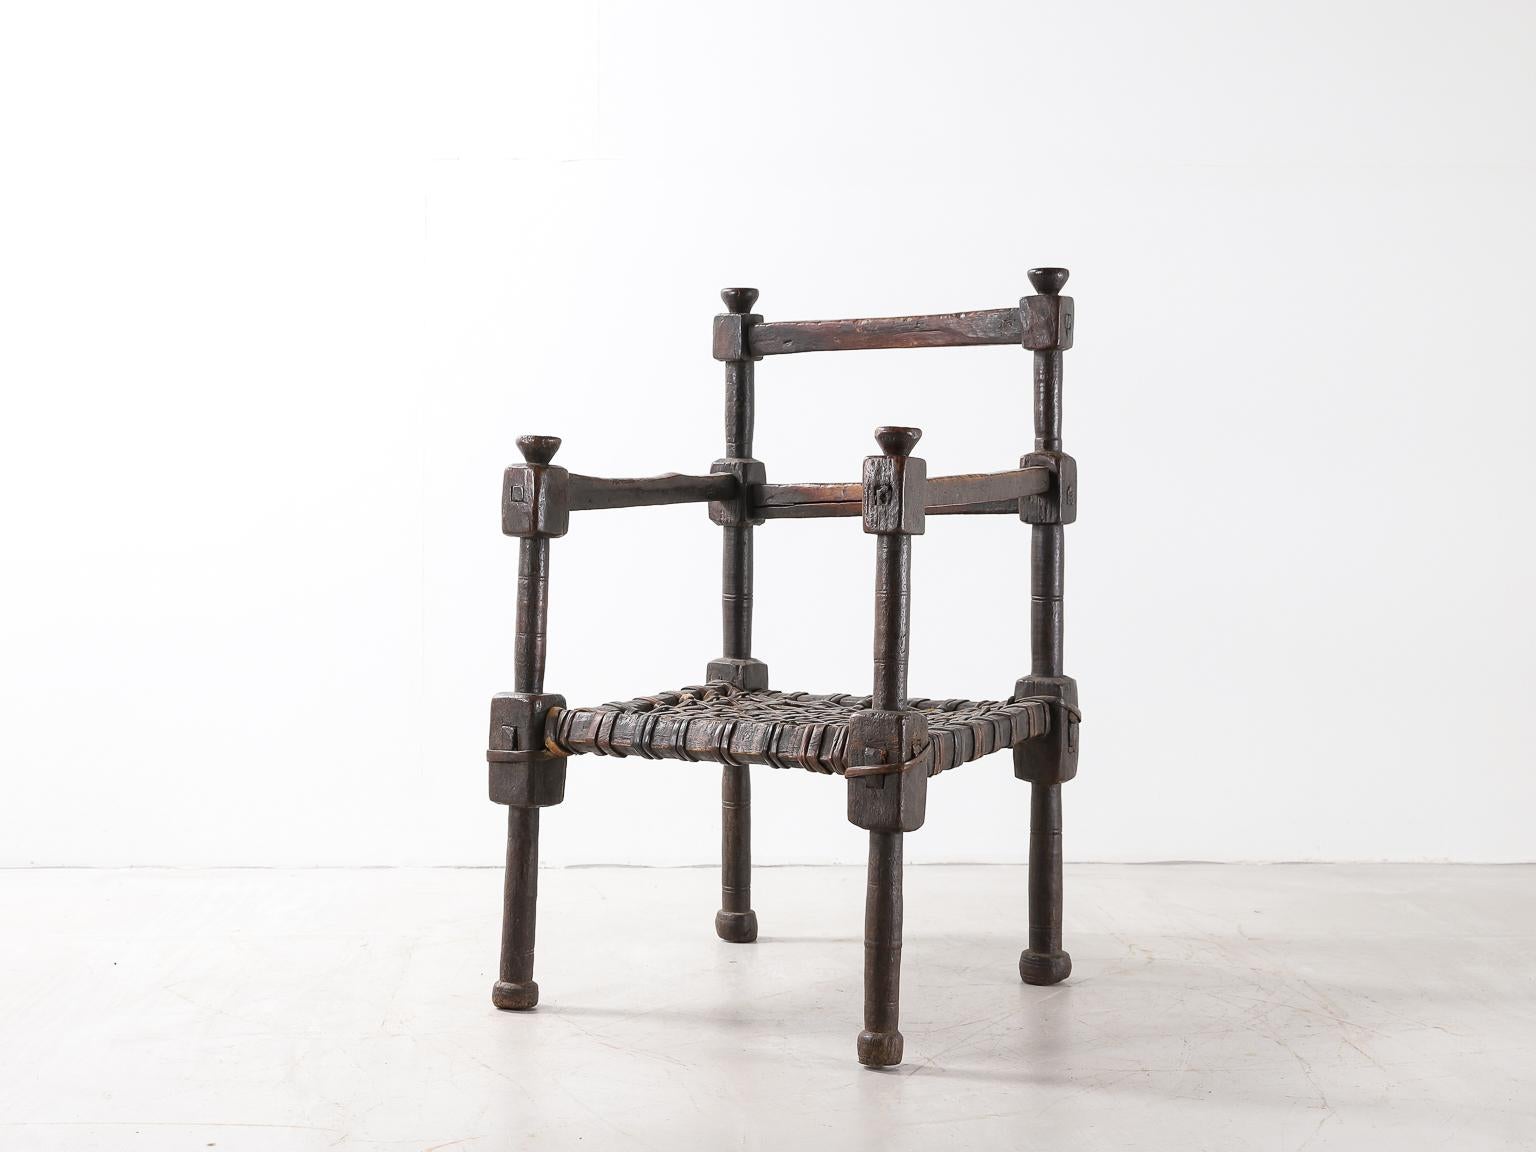 An Ethiopian chair in hand carved wood with rich patina, with woven leather seat.